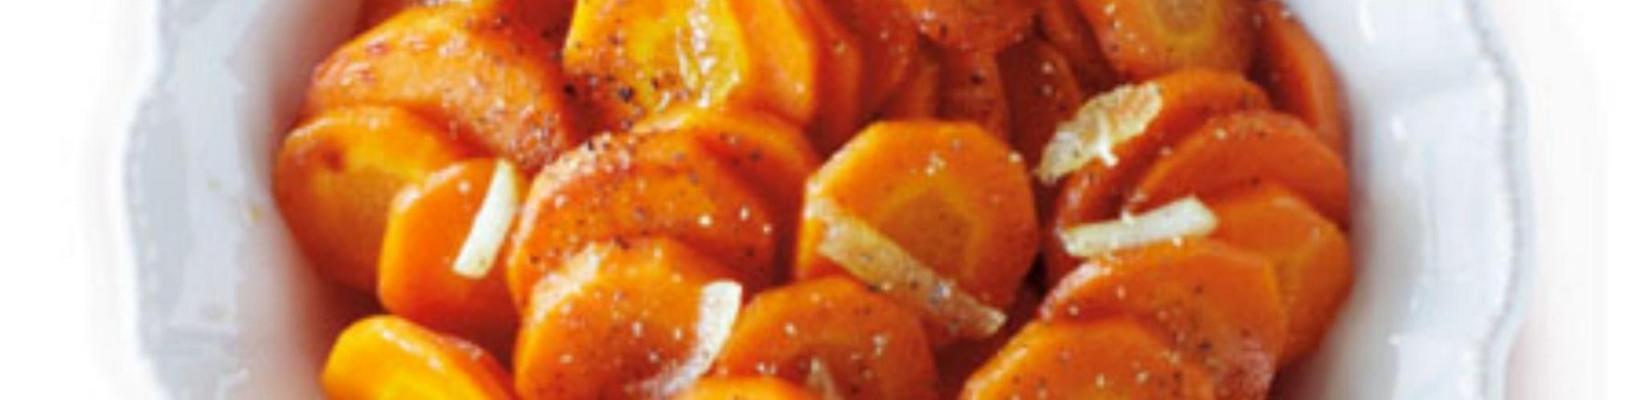 candied carrot with ginger and garlic